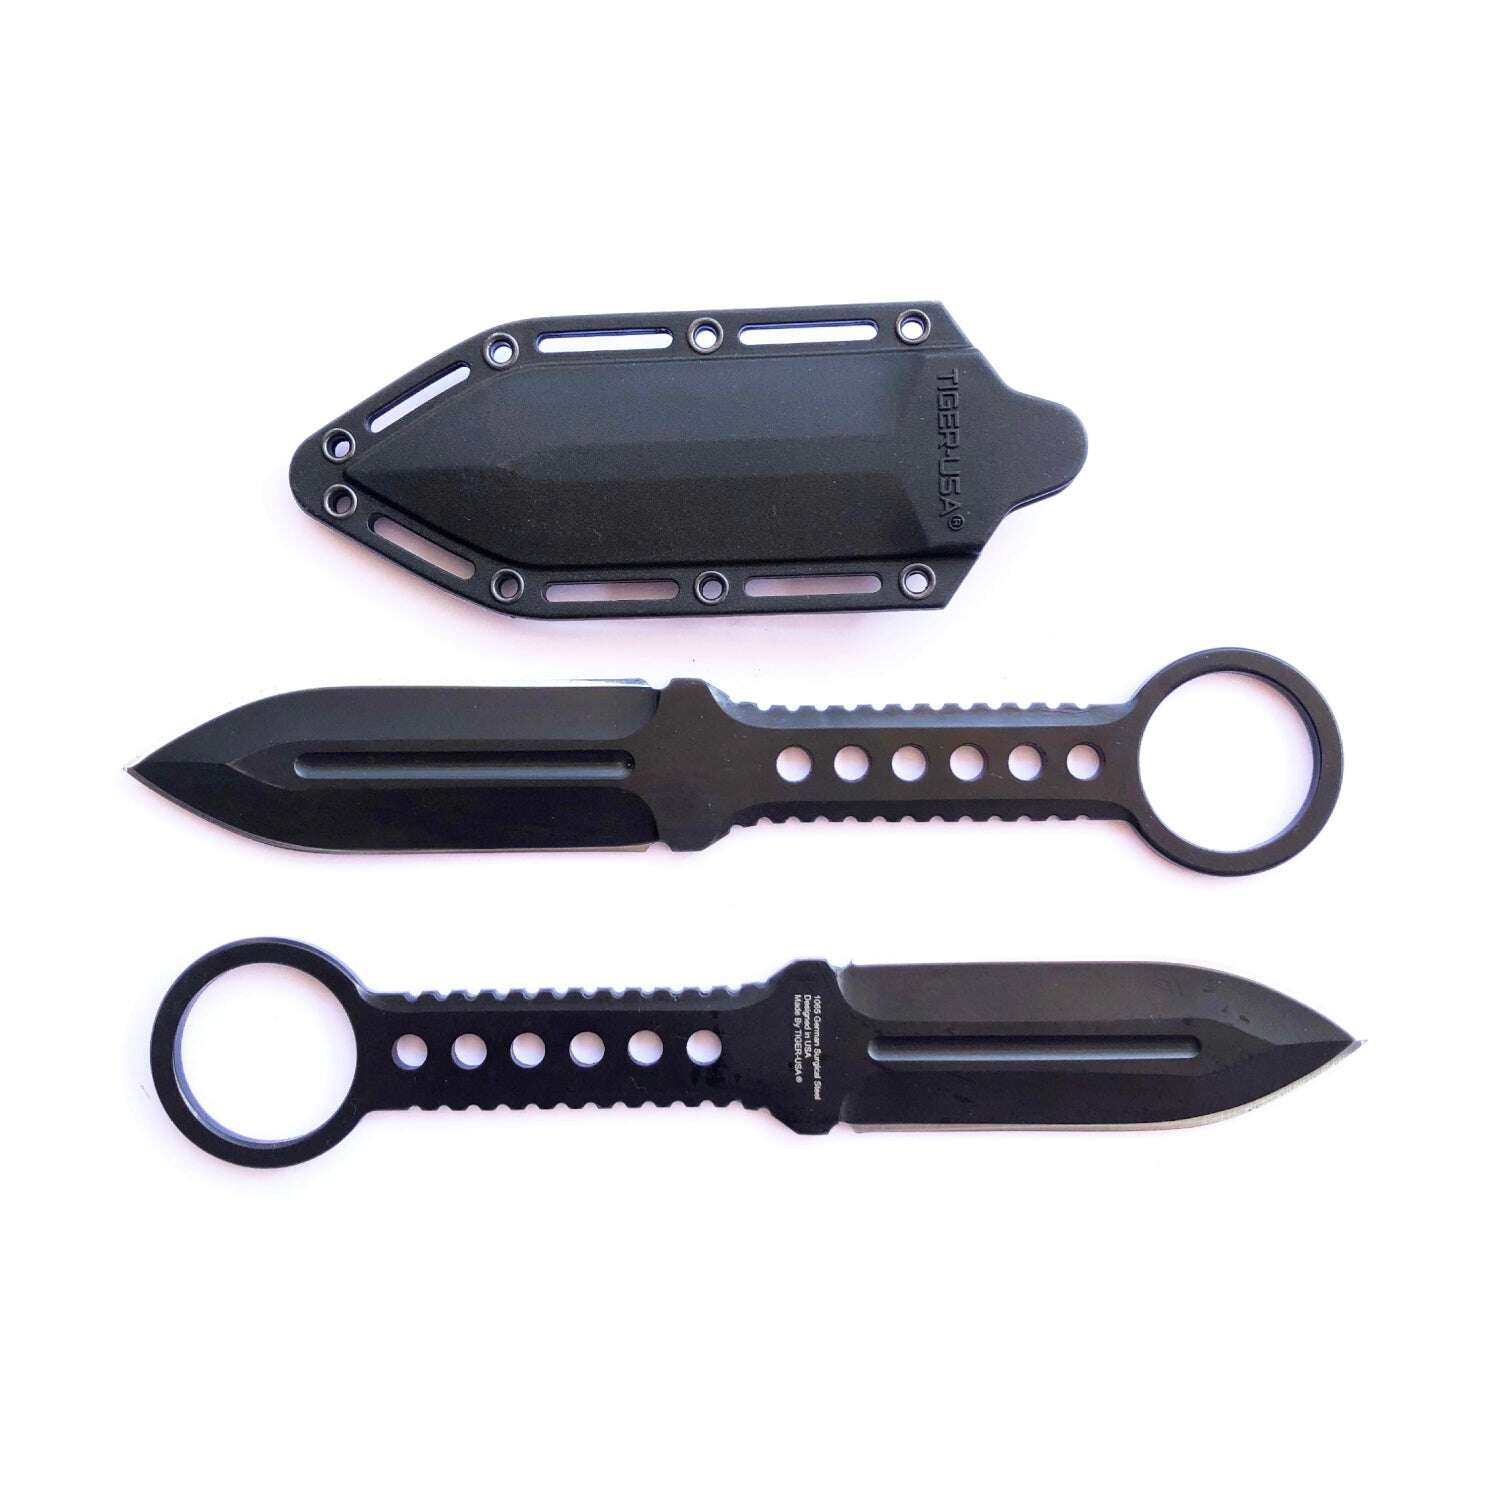 Tactical Jungle King® Survival Knife W/ Holster